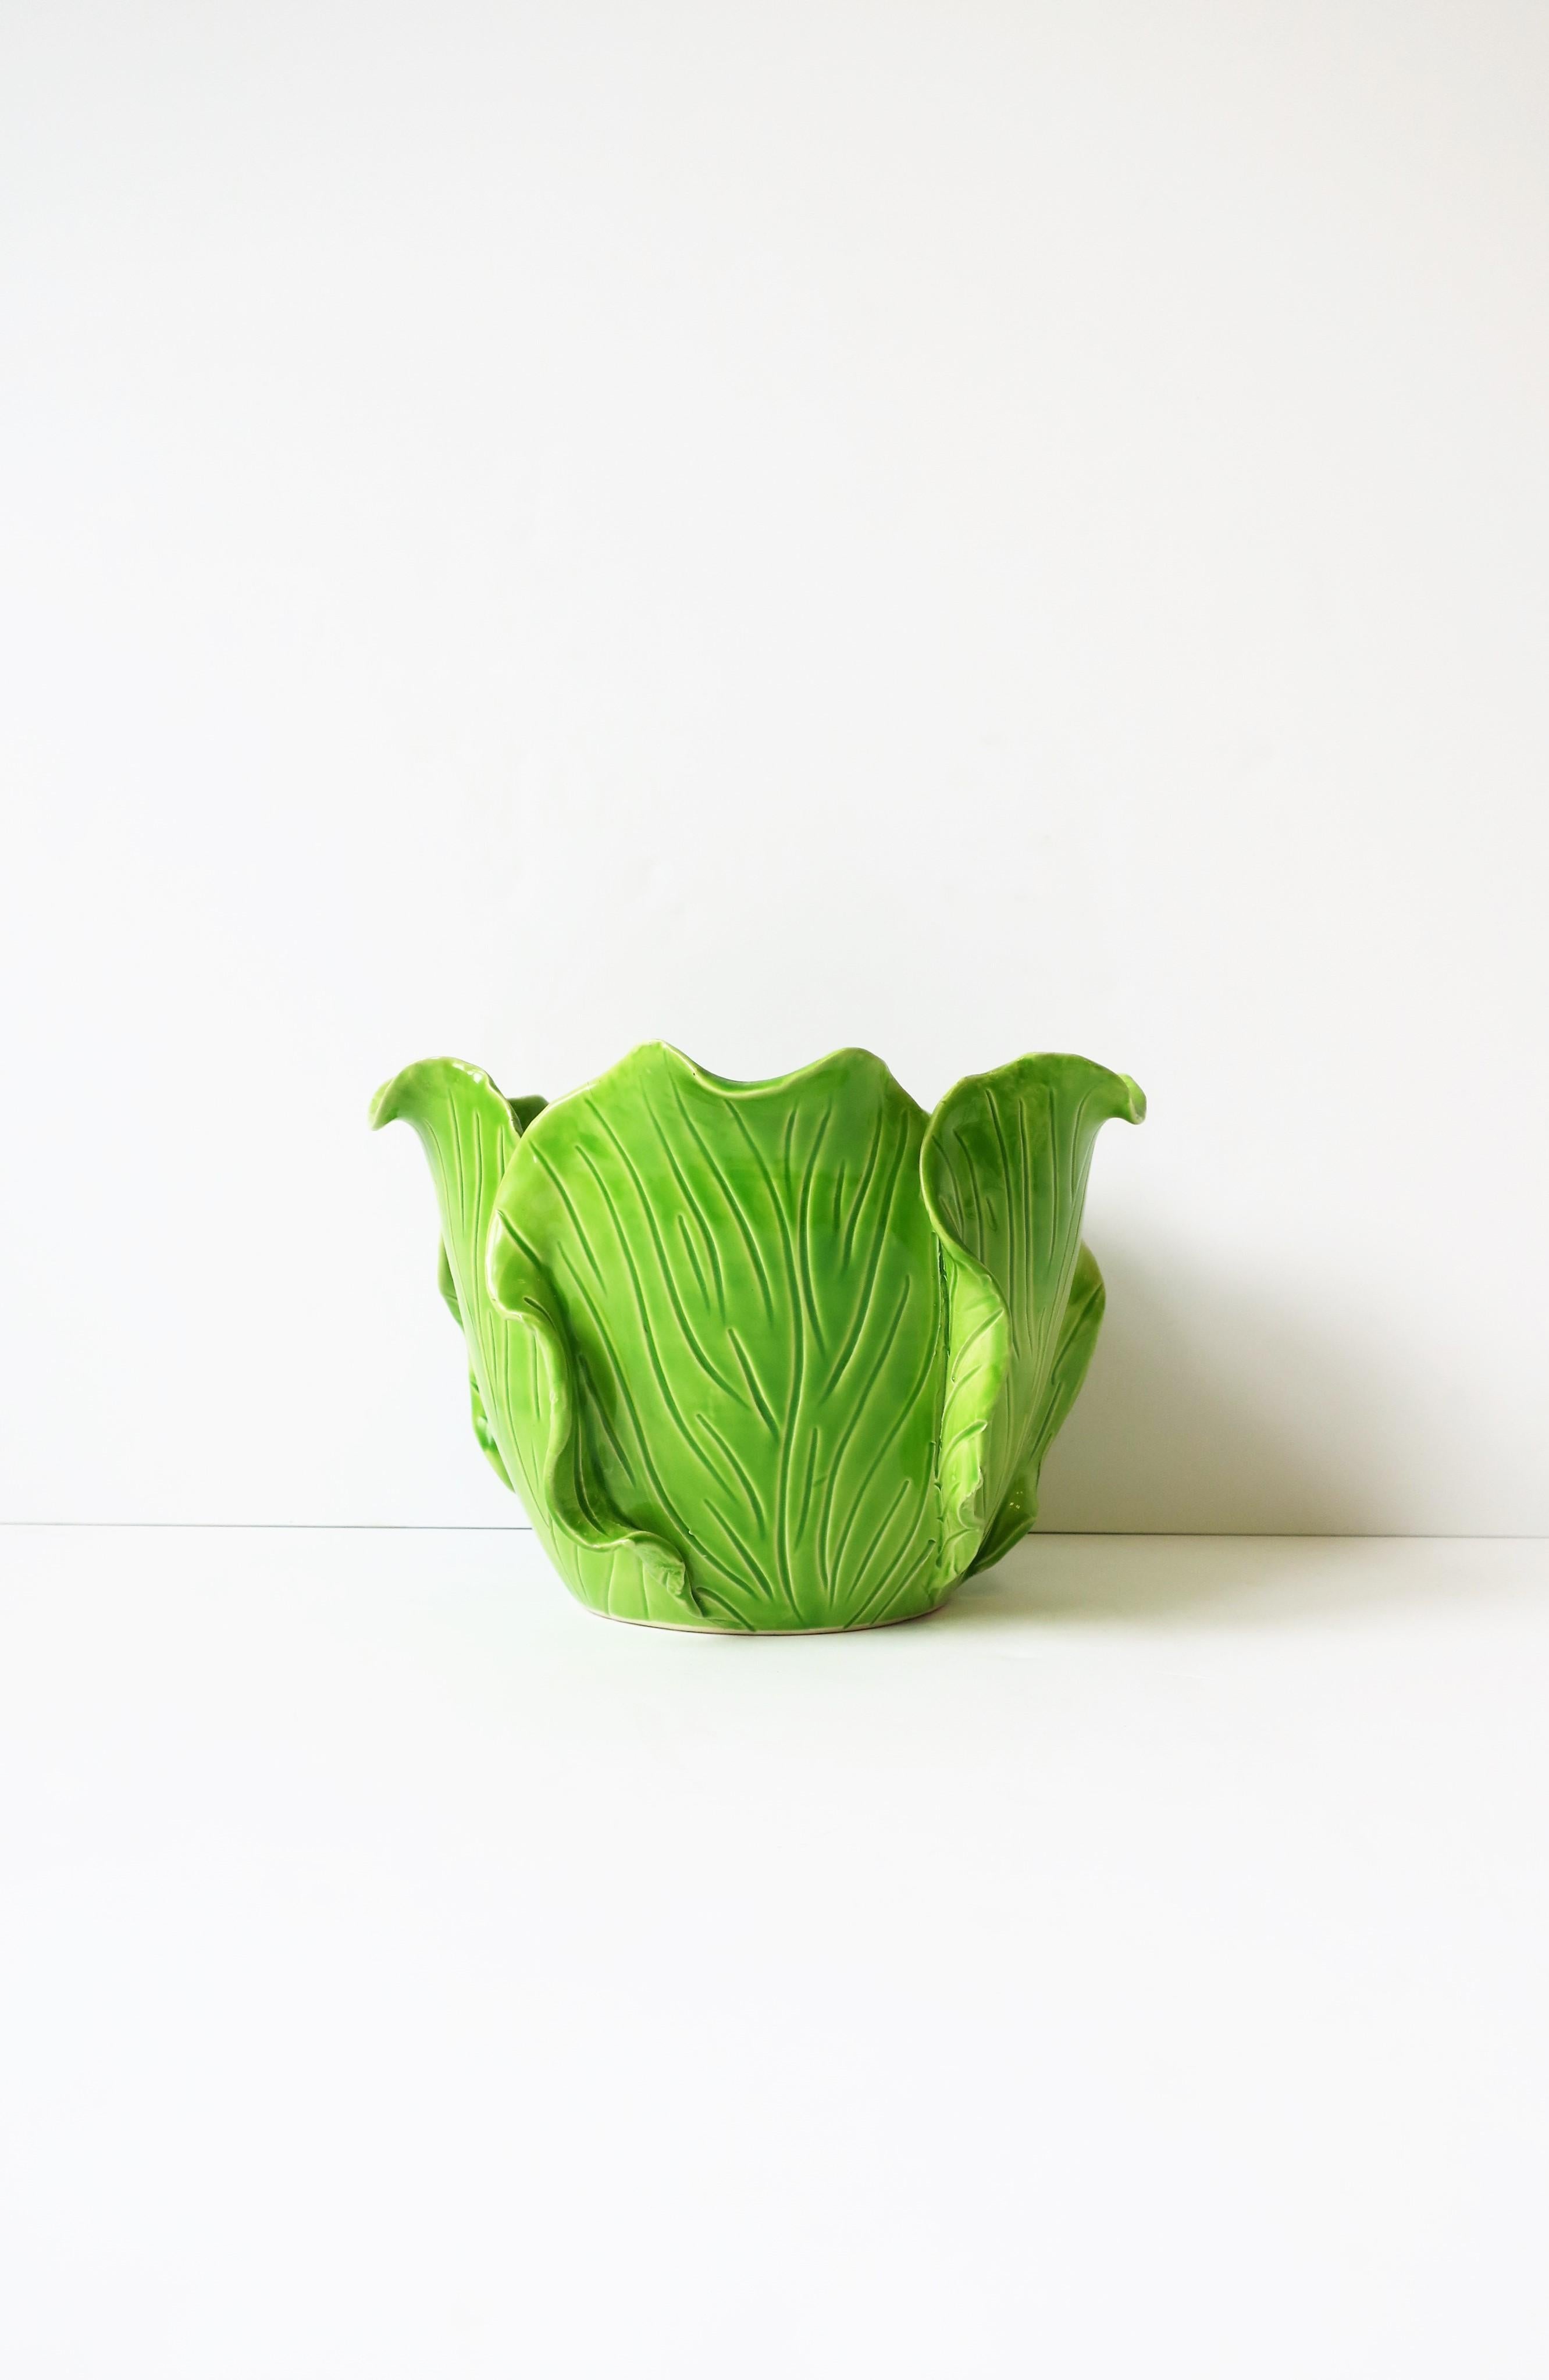 A beautiful and rare hand-made French green ceramic lettuce cabbage leaf or flower plant leaf cachepot jardinière plant or flowerpot holder from Maison Jean Roger by ceramist designer Jean Roger, Paris, France, circa 20th century. Piece could also